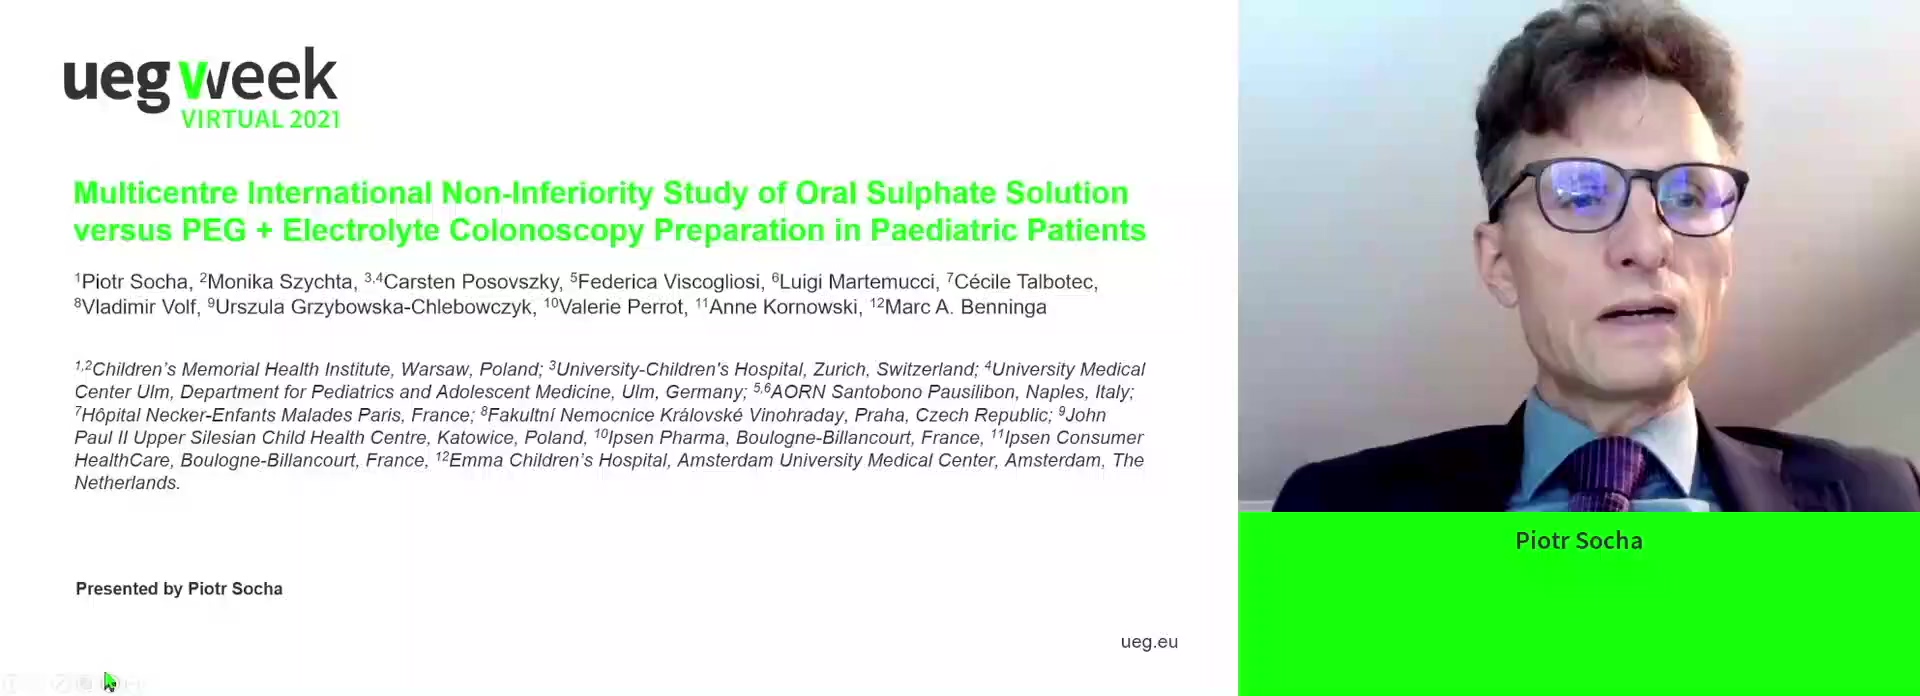 MULTICENTRE INTERNATIONAL NON-INFERIORITY PHASE III STUDY OF ORAL SULPHATE SOLUTION (OSS) VERSUS POLYETHYLENE GLYCOL (PEG)+ ELECTROLYTE COLONOSCOPY PREPARATION IN PAEDIATRIC PATIENTS